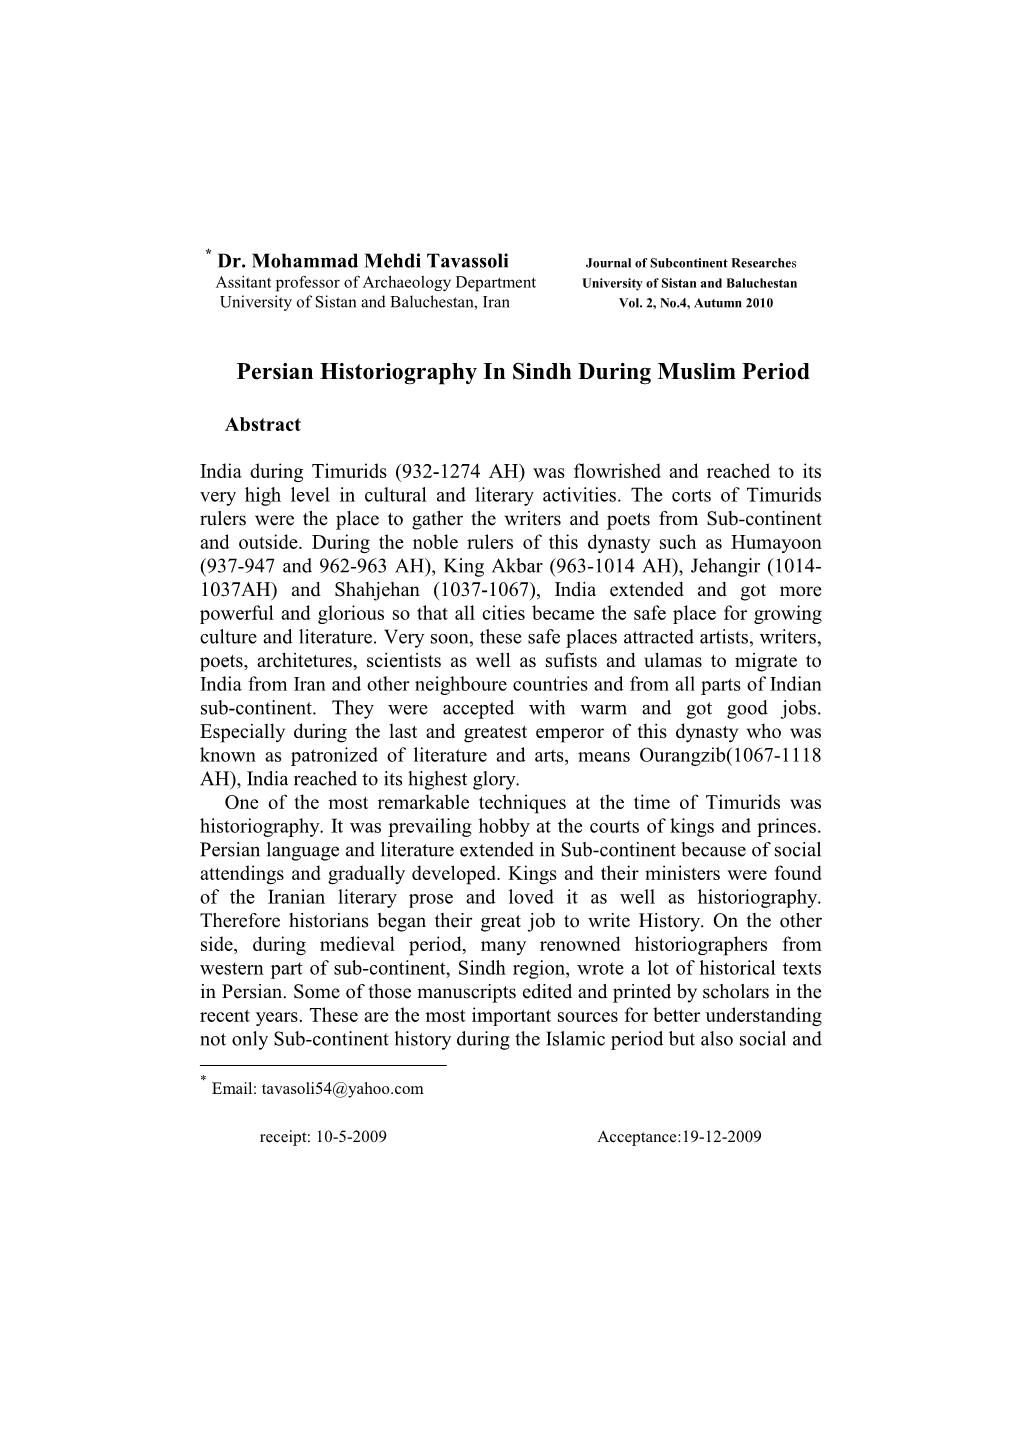 Persian Historiography in Sindh During Muslim Period